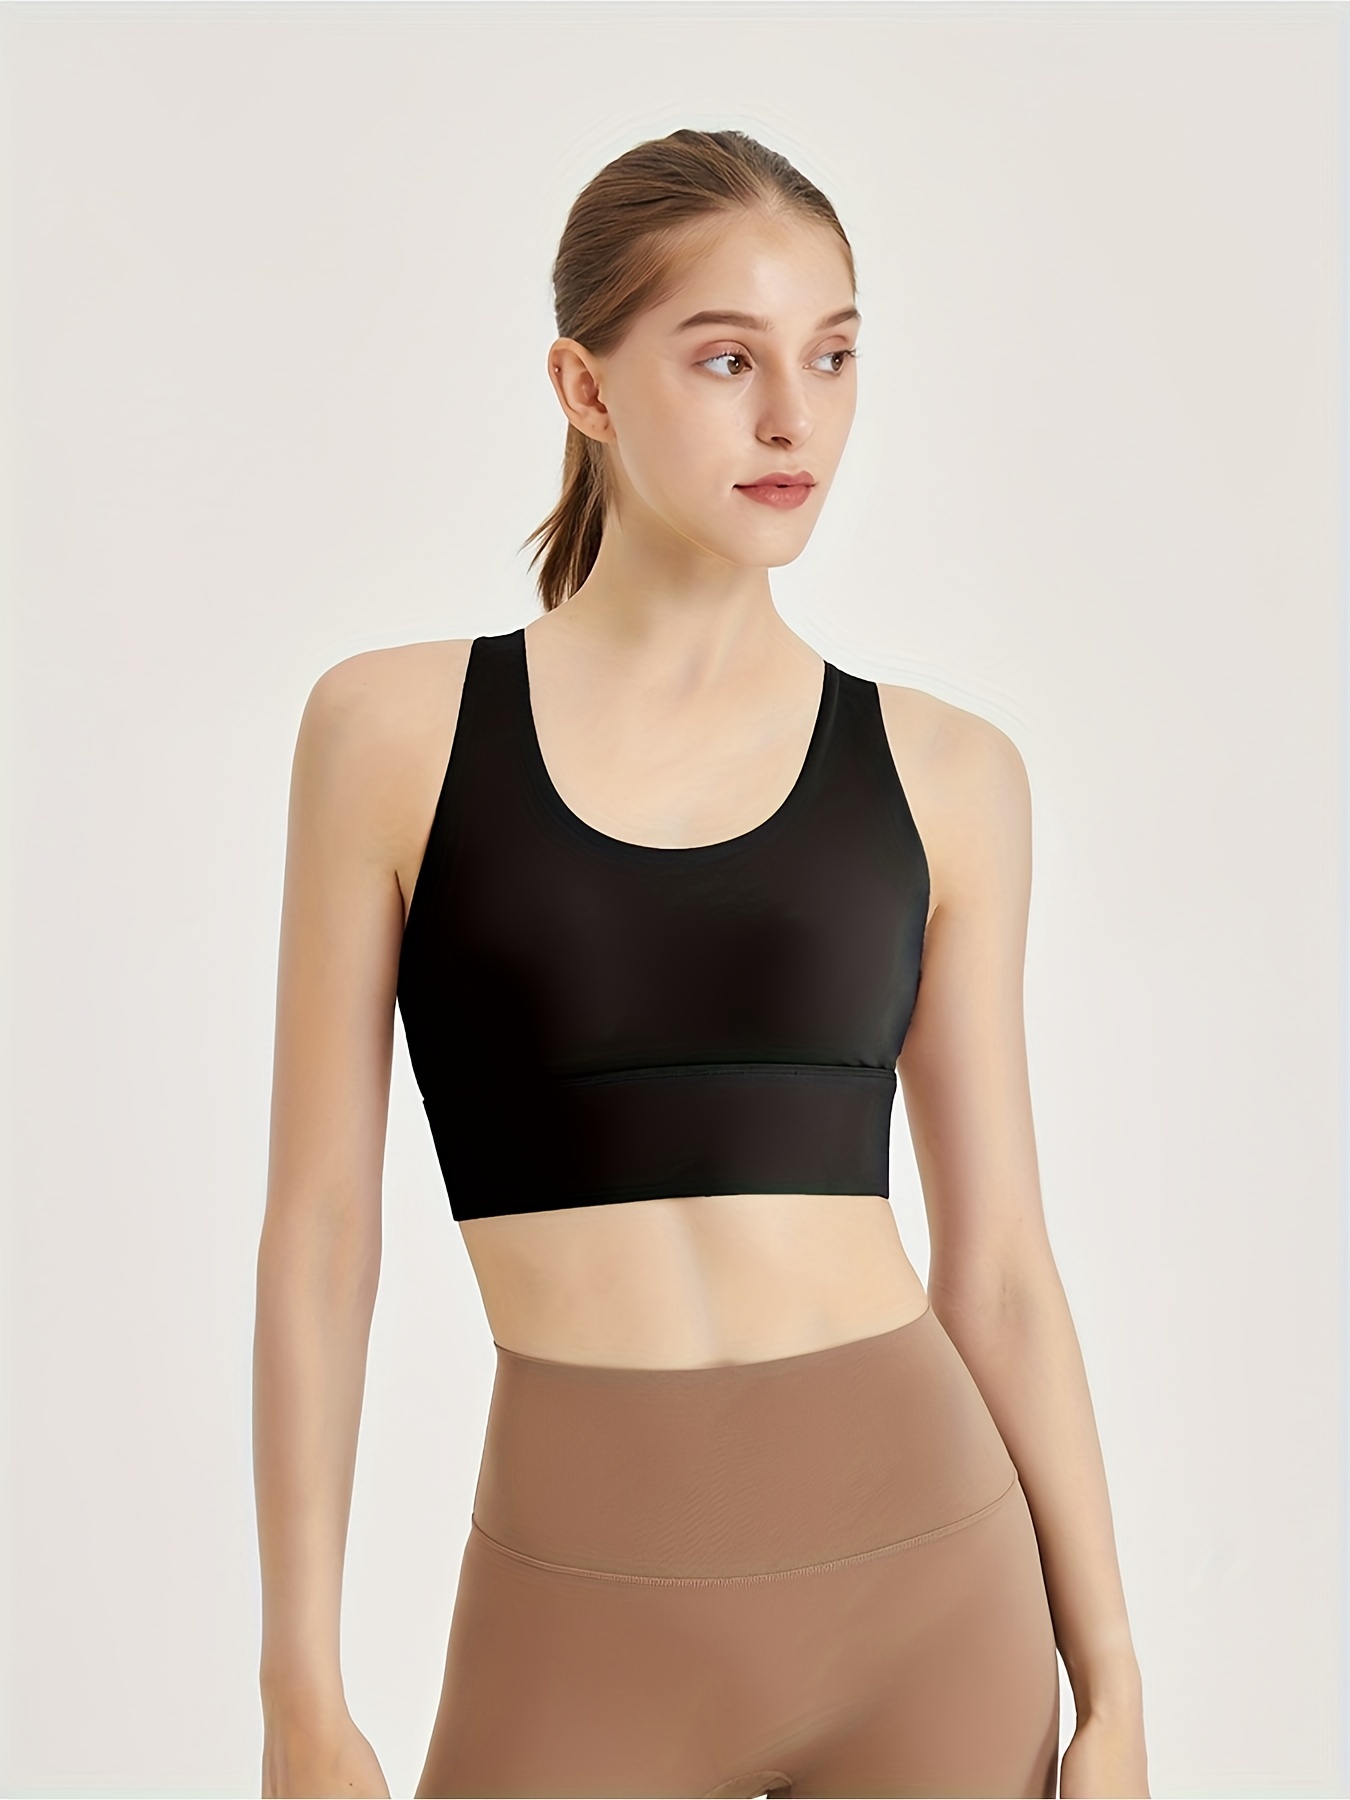 Is That The New Medium Support Crisscross Backless Sports Bra